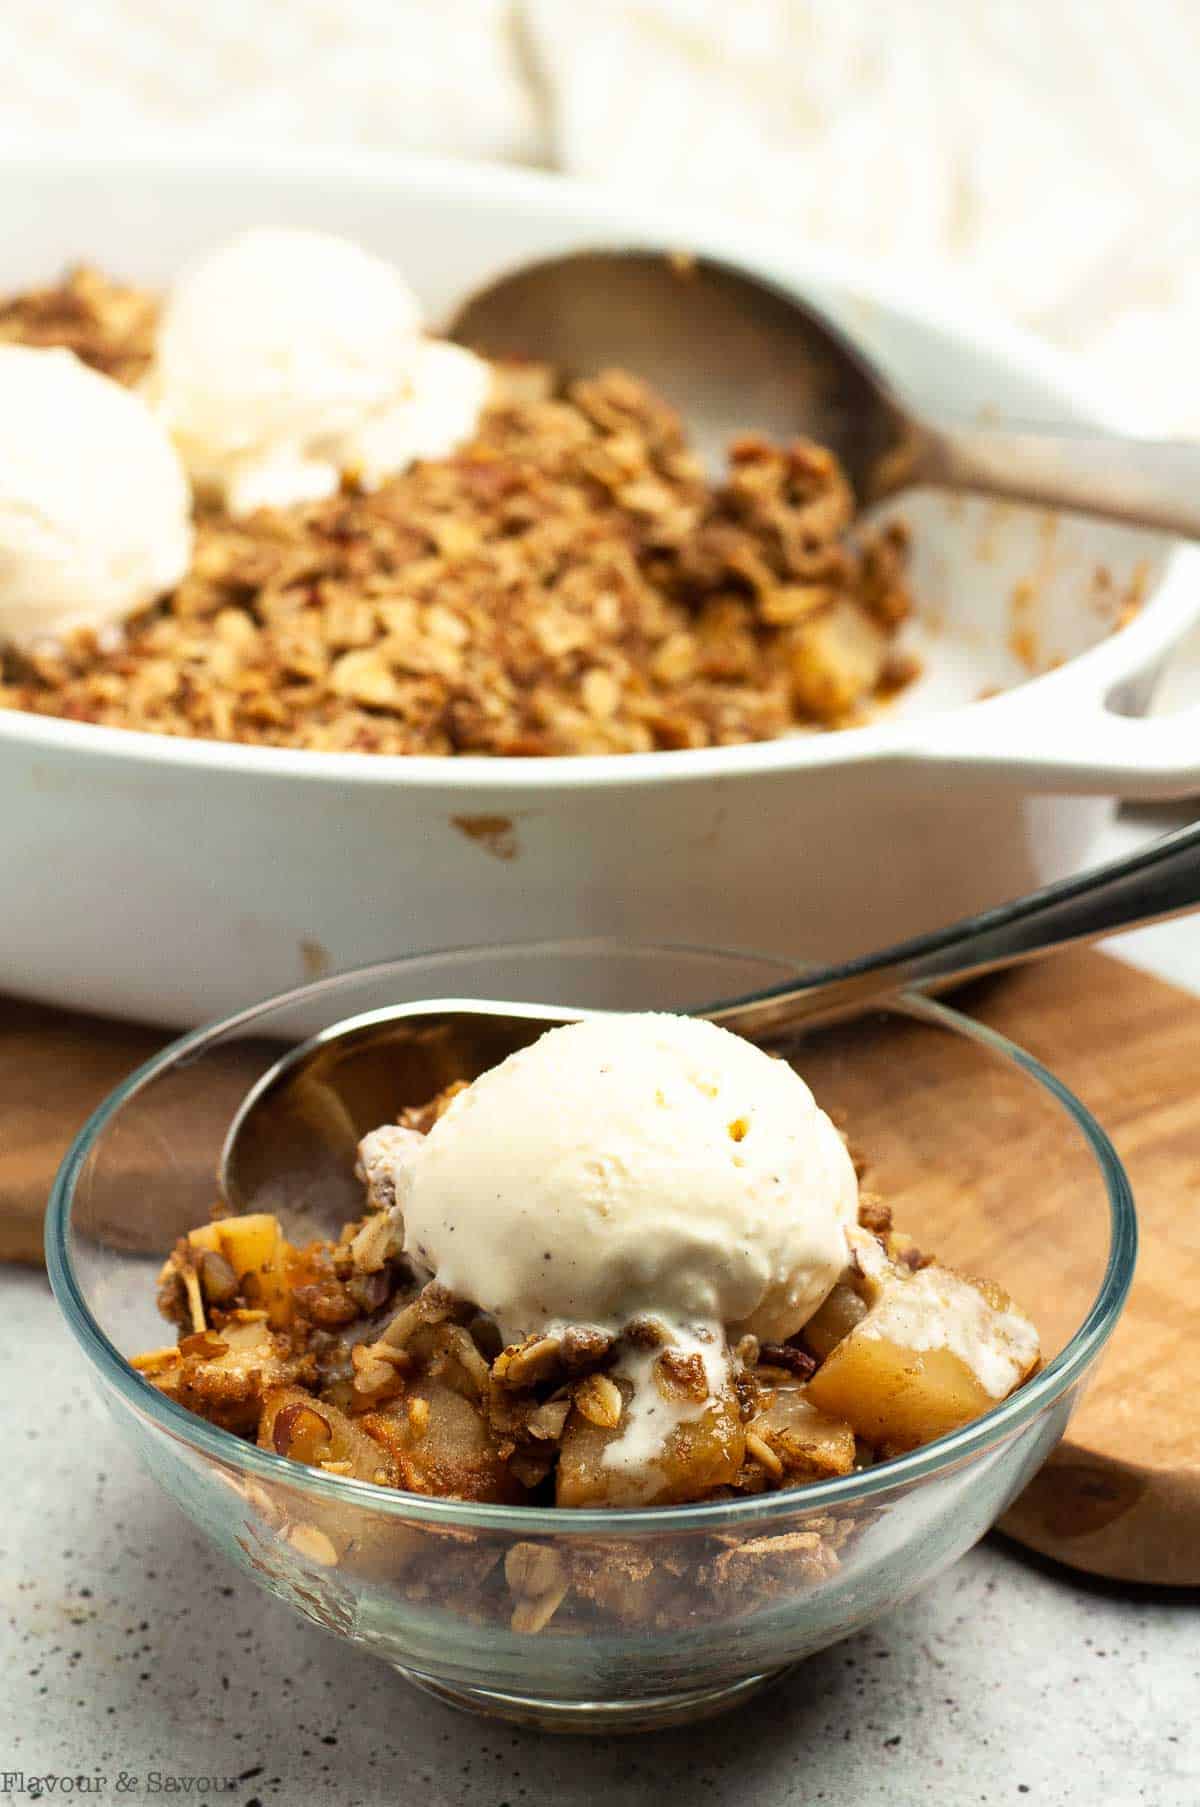 A baking dish and a dessert dish with Pecan Pear Crisp with scoops of ice cream.